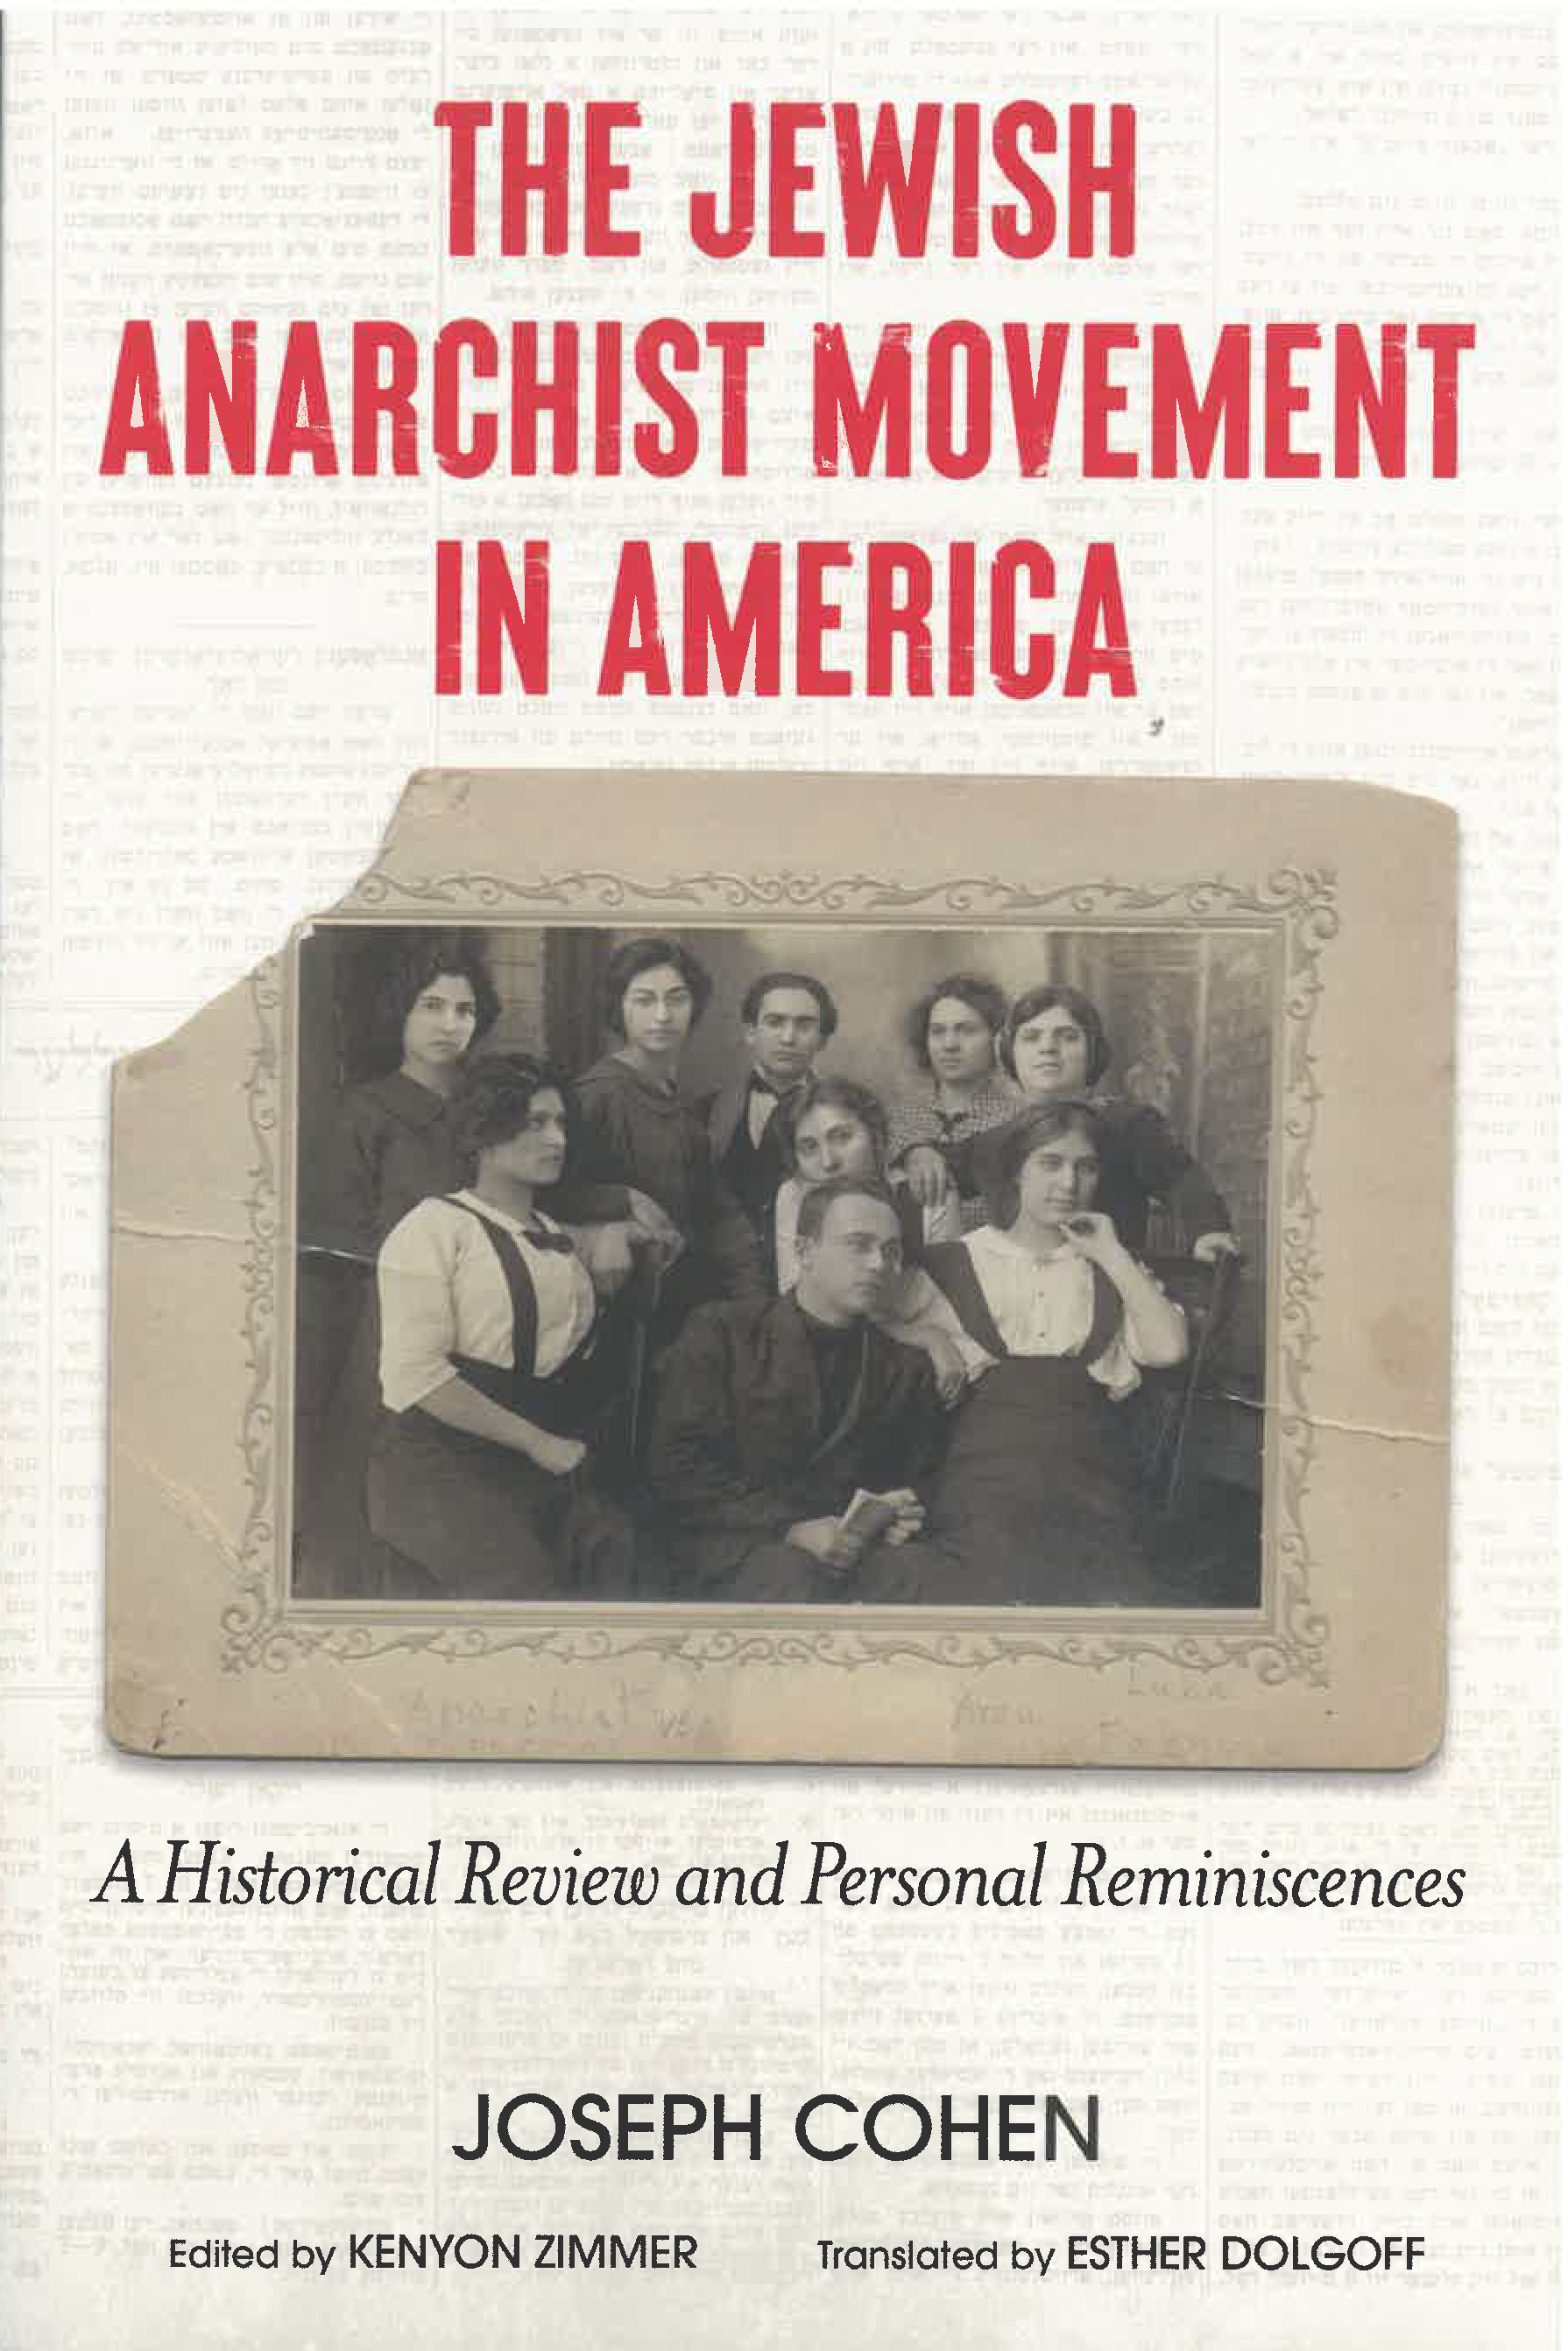 Book cover of The Jewish Anarchist Movement in America by Joseph Cohen, Kenyon Zimmer, ed.